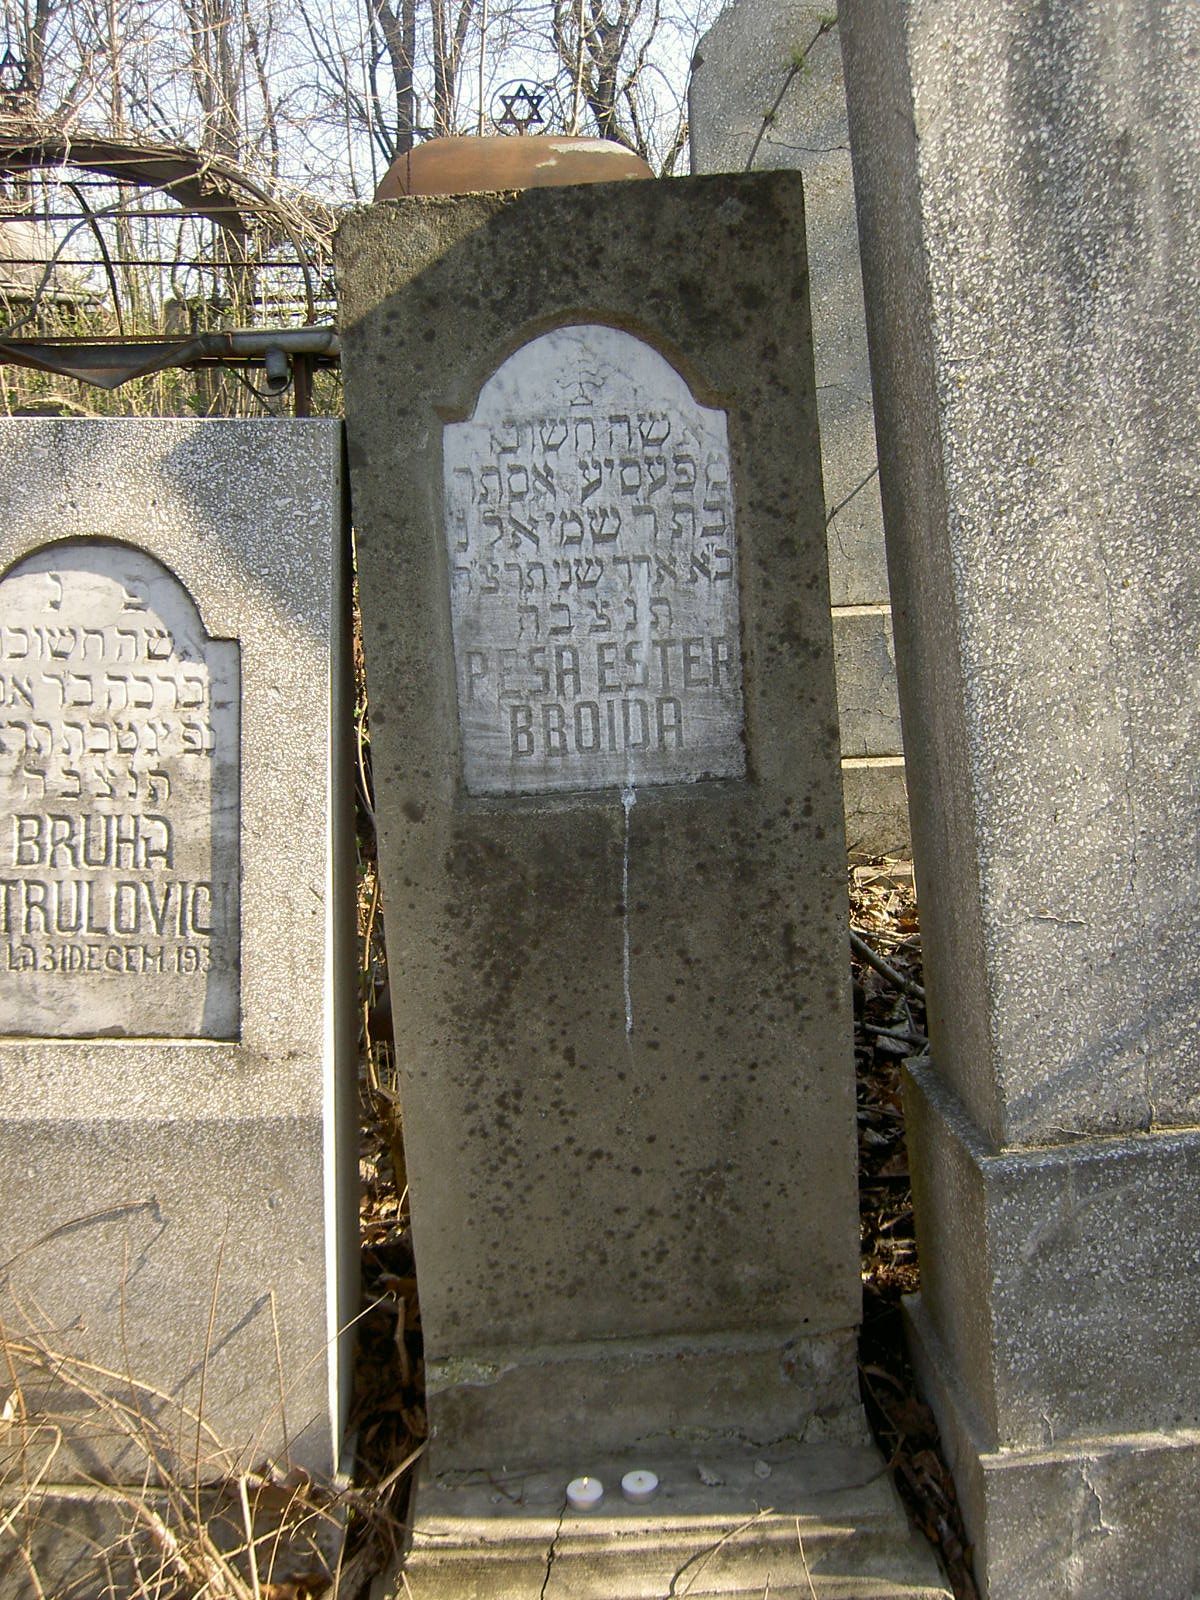 Taken on March 29th, 2007 at the Jewish (old or new) Cemetery at RO(Botoşani) and sourced from JG029873=ALX=FinkelsteinAlex.